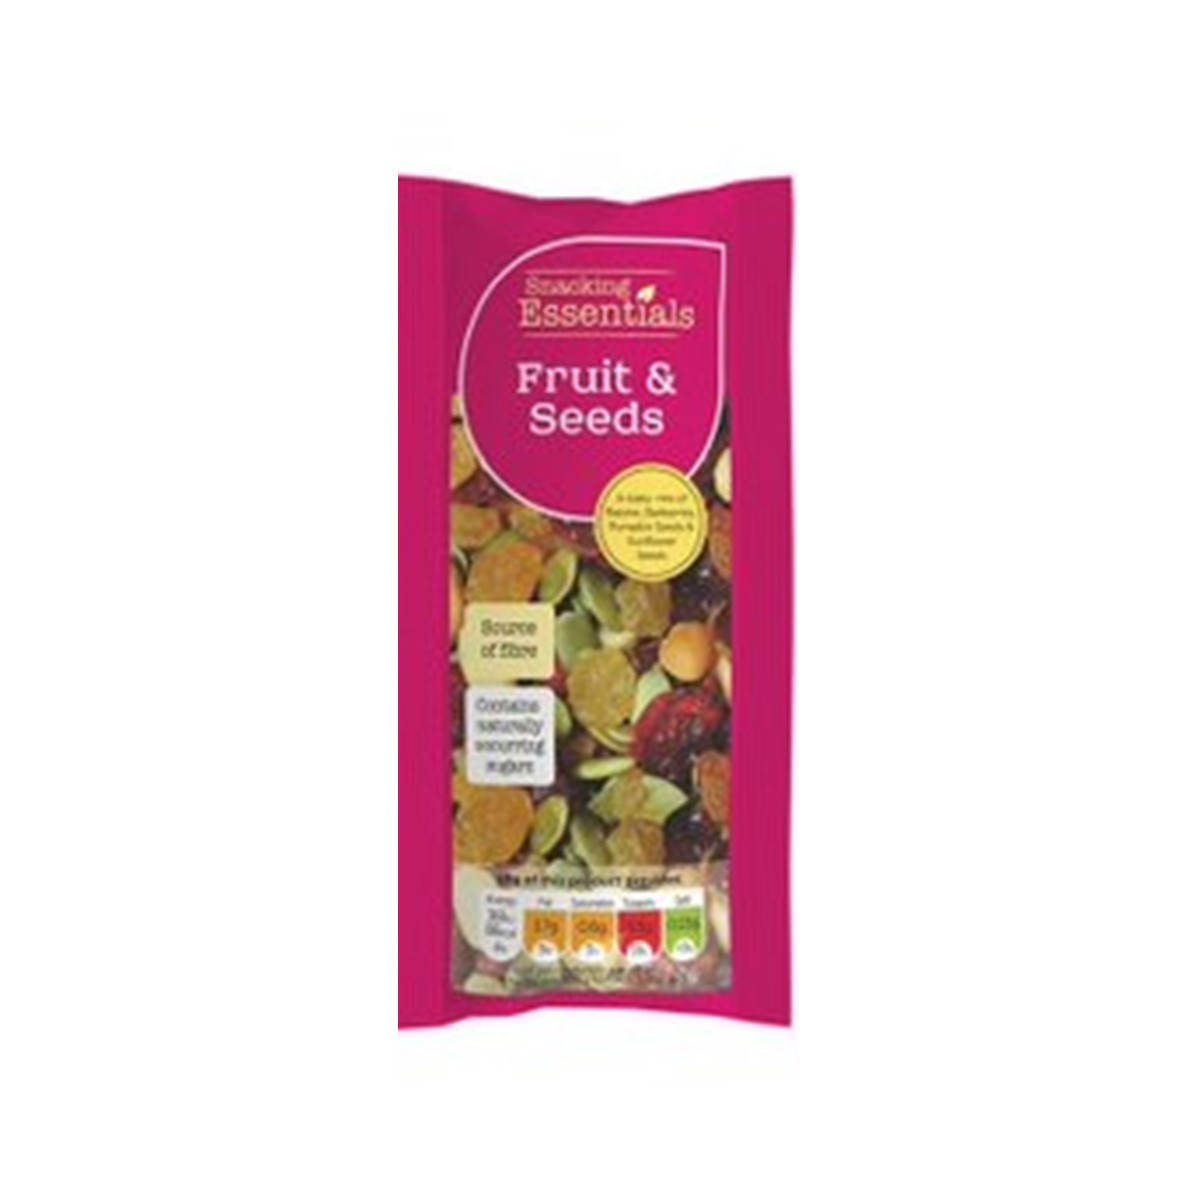 Snacking Essentials Fruit & Seed Mix - 16x50g packets